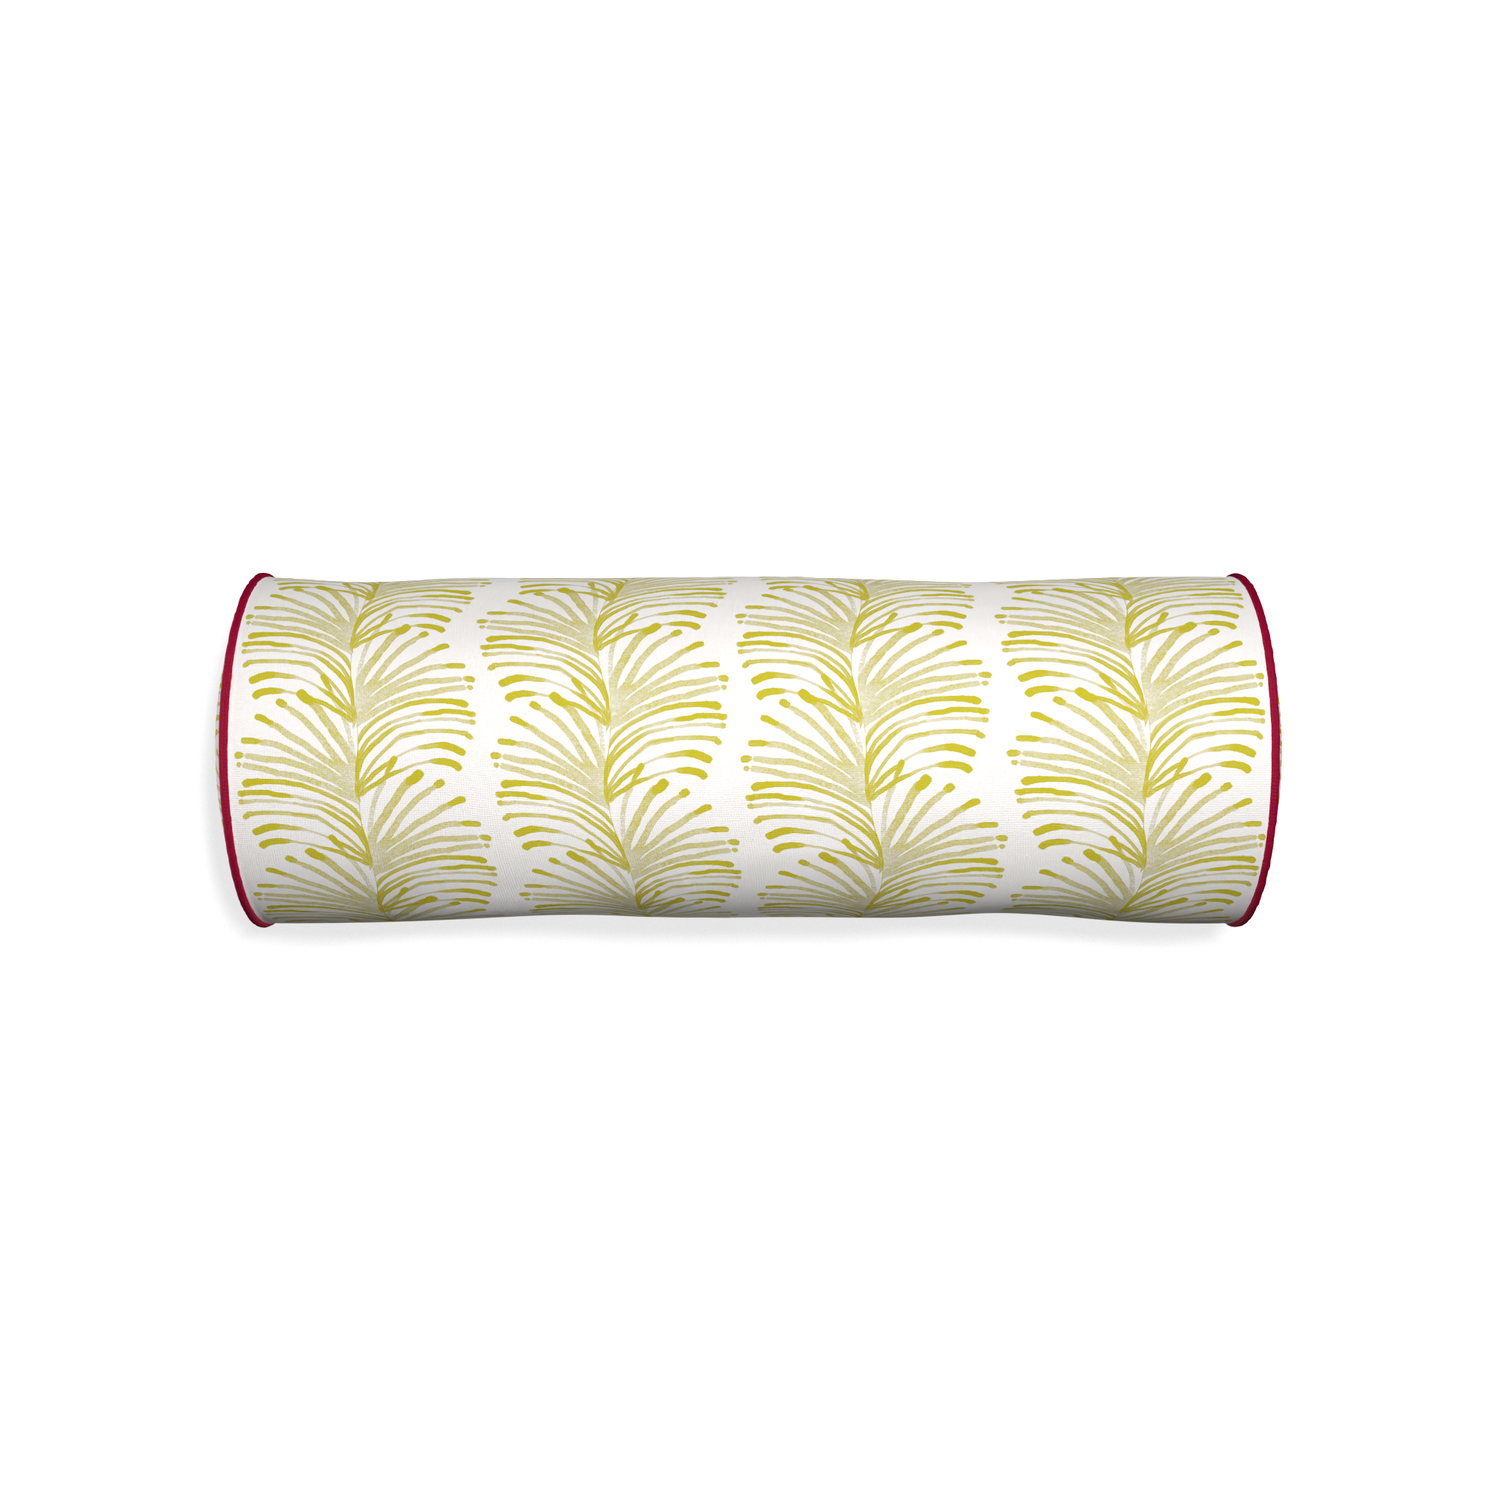 Bolster emma chartreuse custom yellow stripe chartreusepillow with raspberry piping on white background